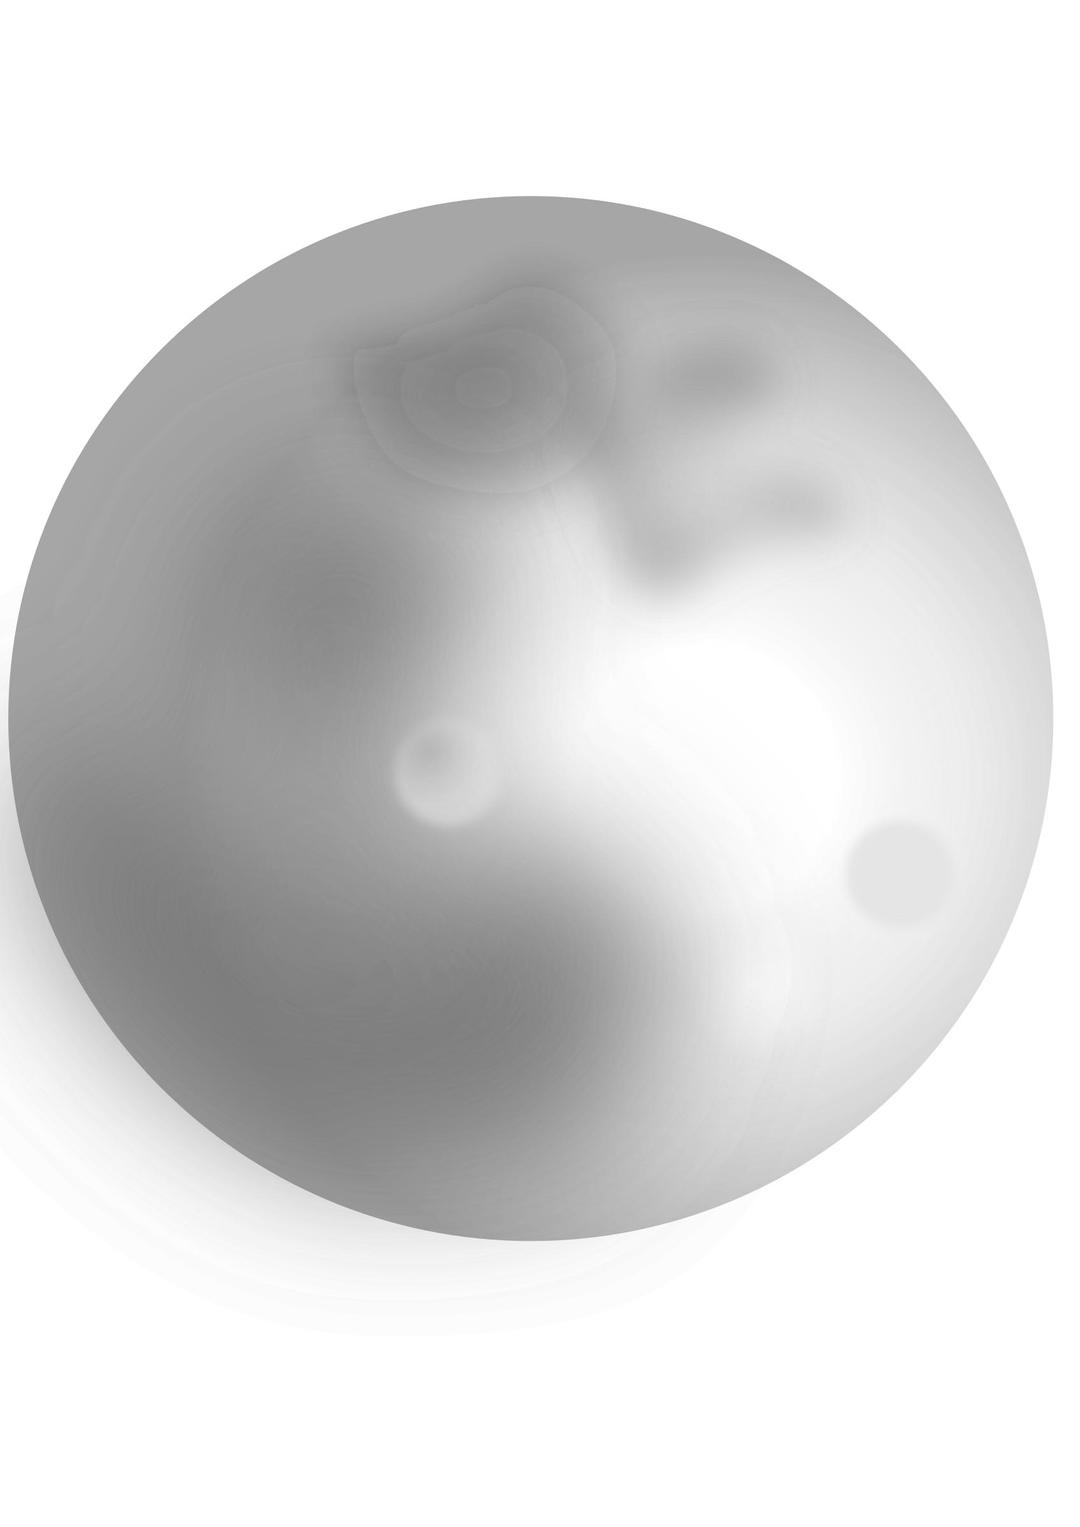 The moon  png transparent